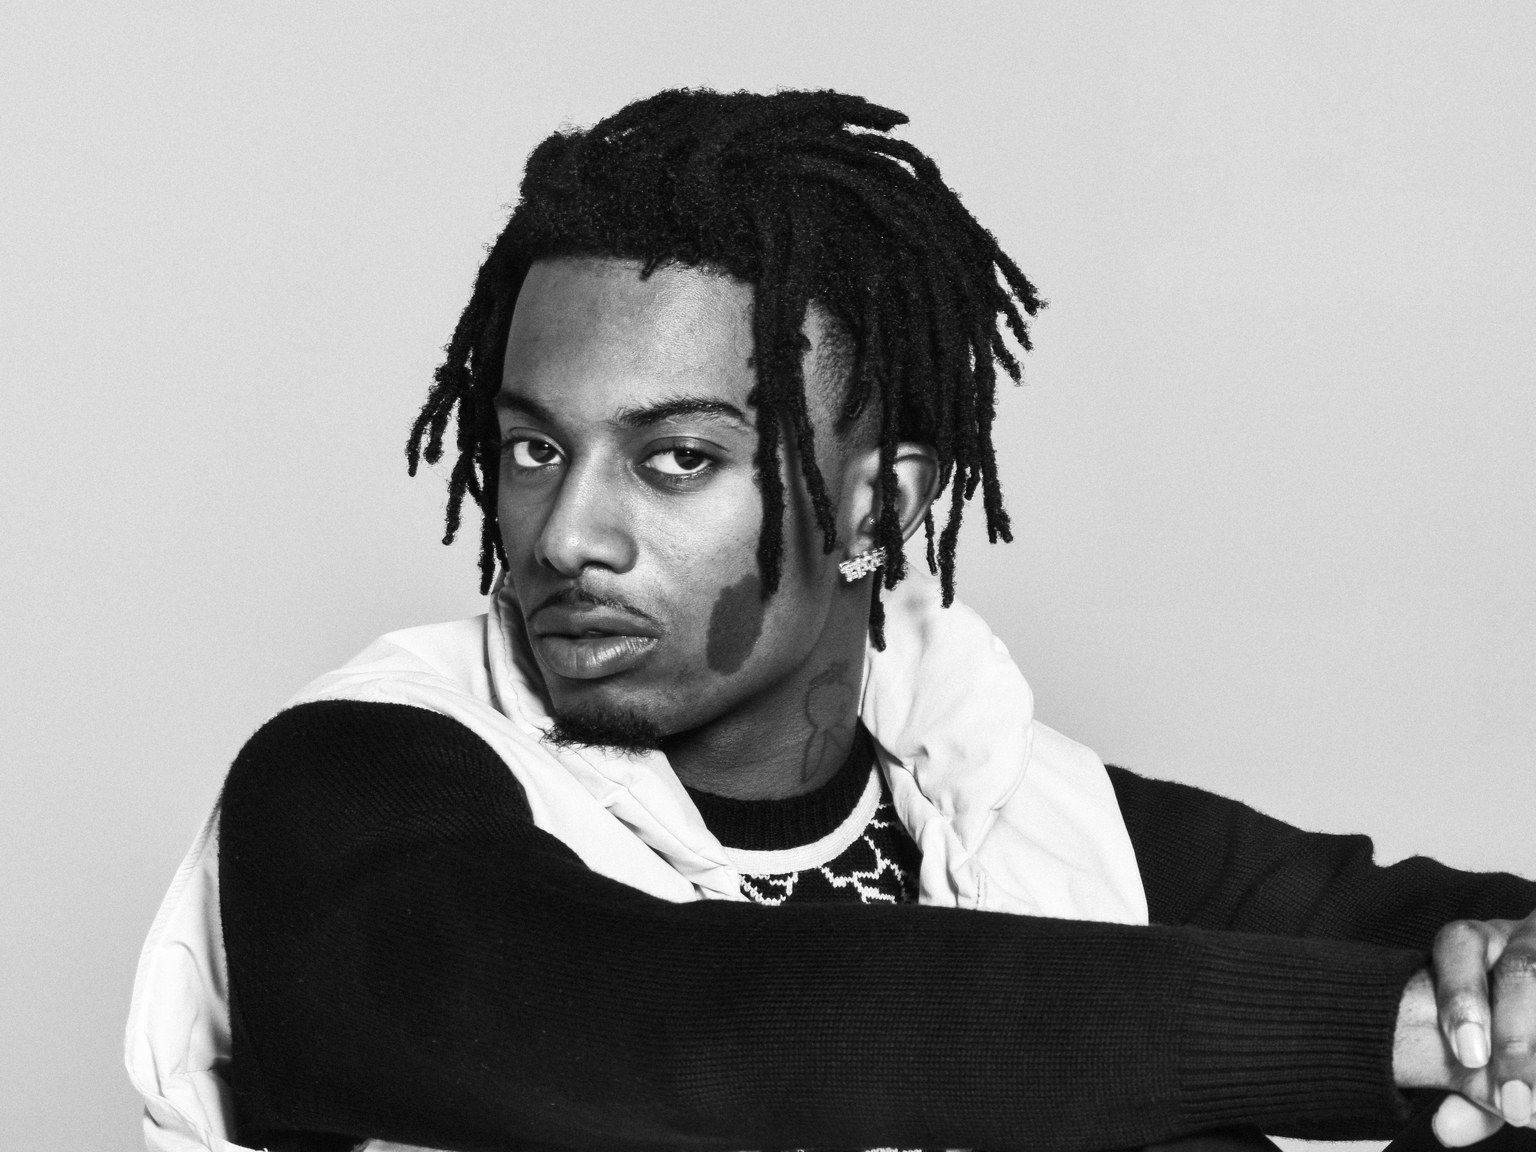 Playboi Carti 1536X1152 Wallpaper and Background Image